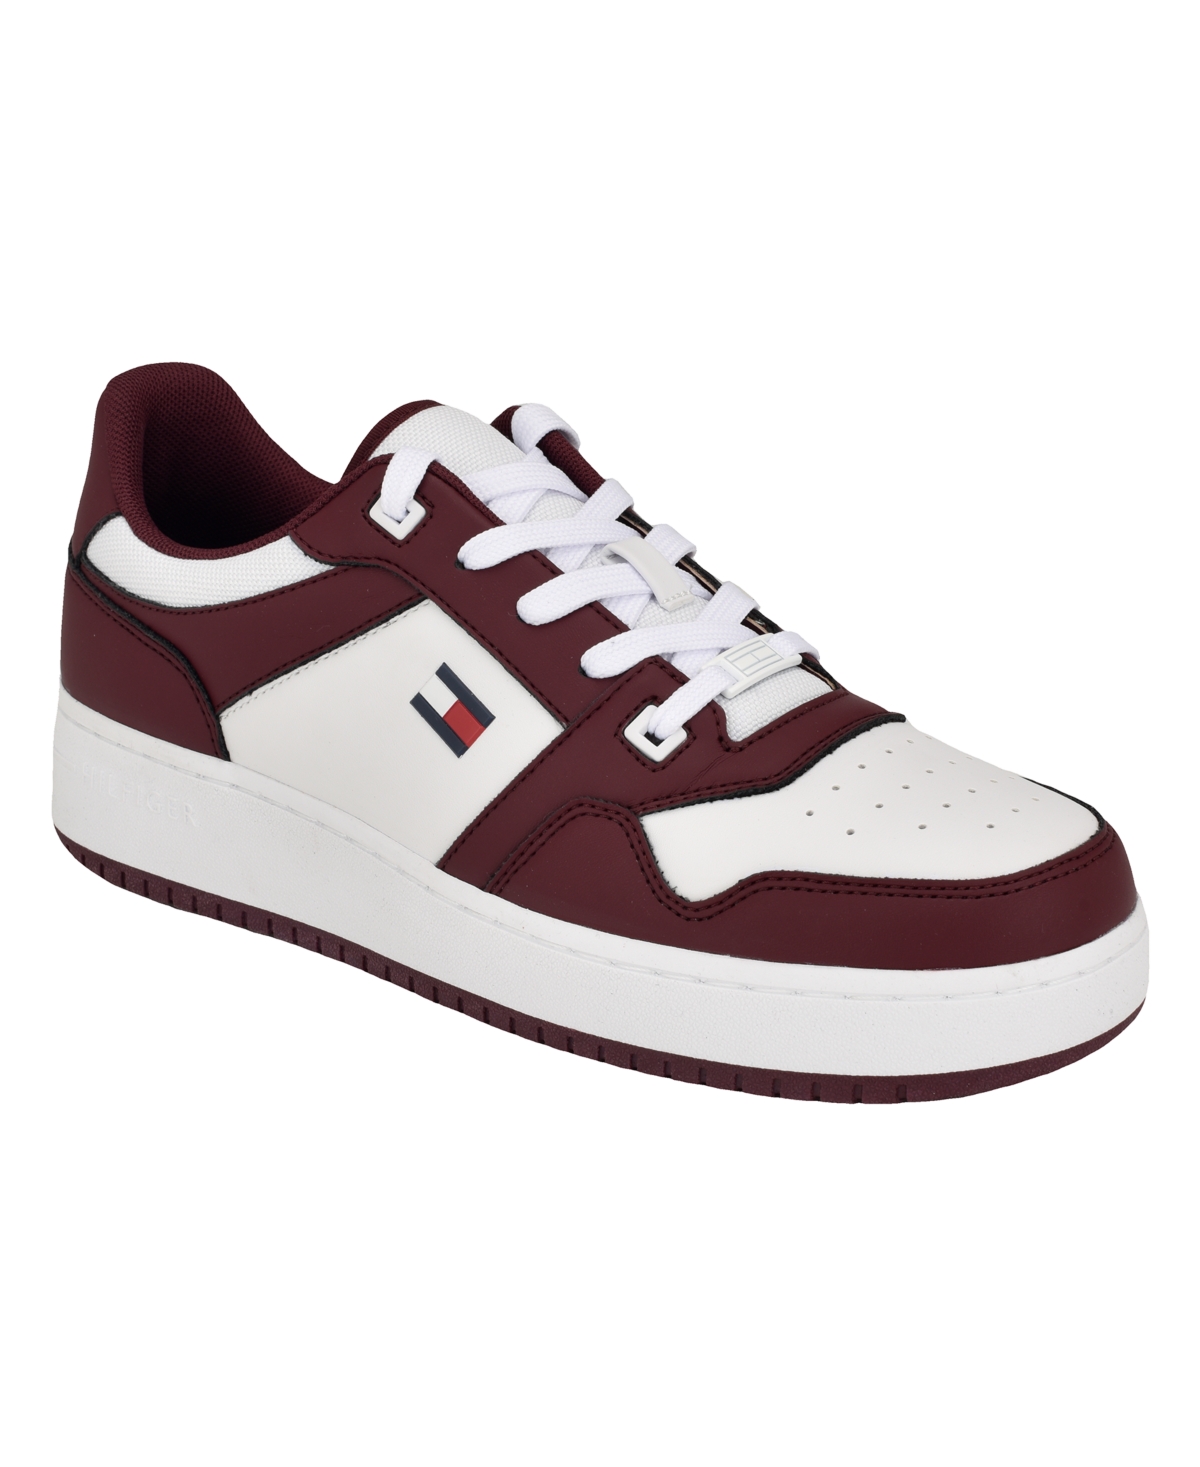 Tommy Hilfiger Men's Krane Lace Up Fashion Sneakers In Burgundy,white